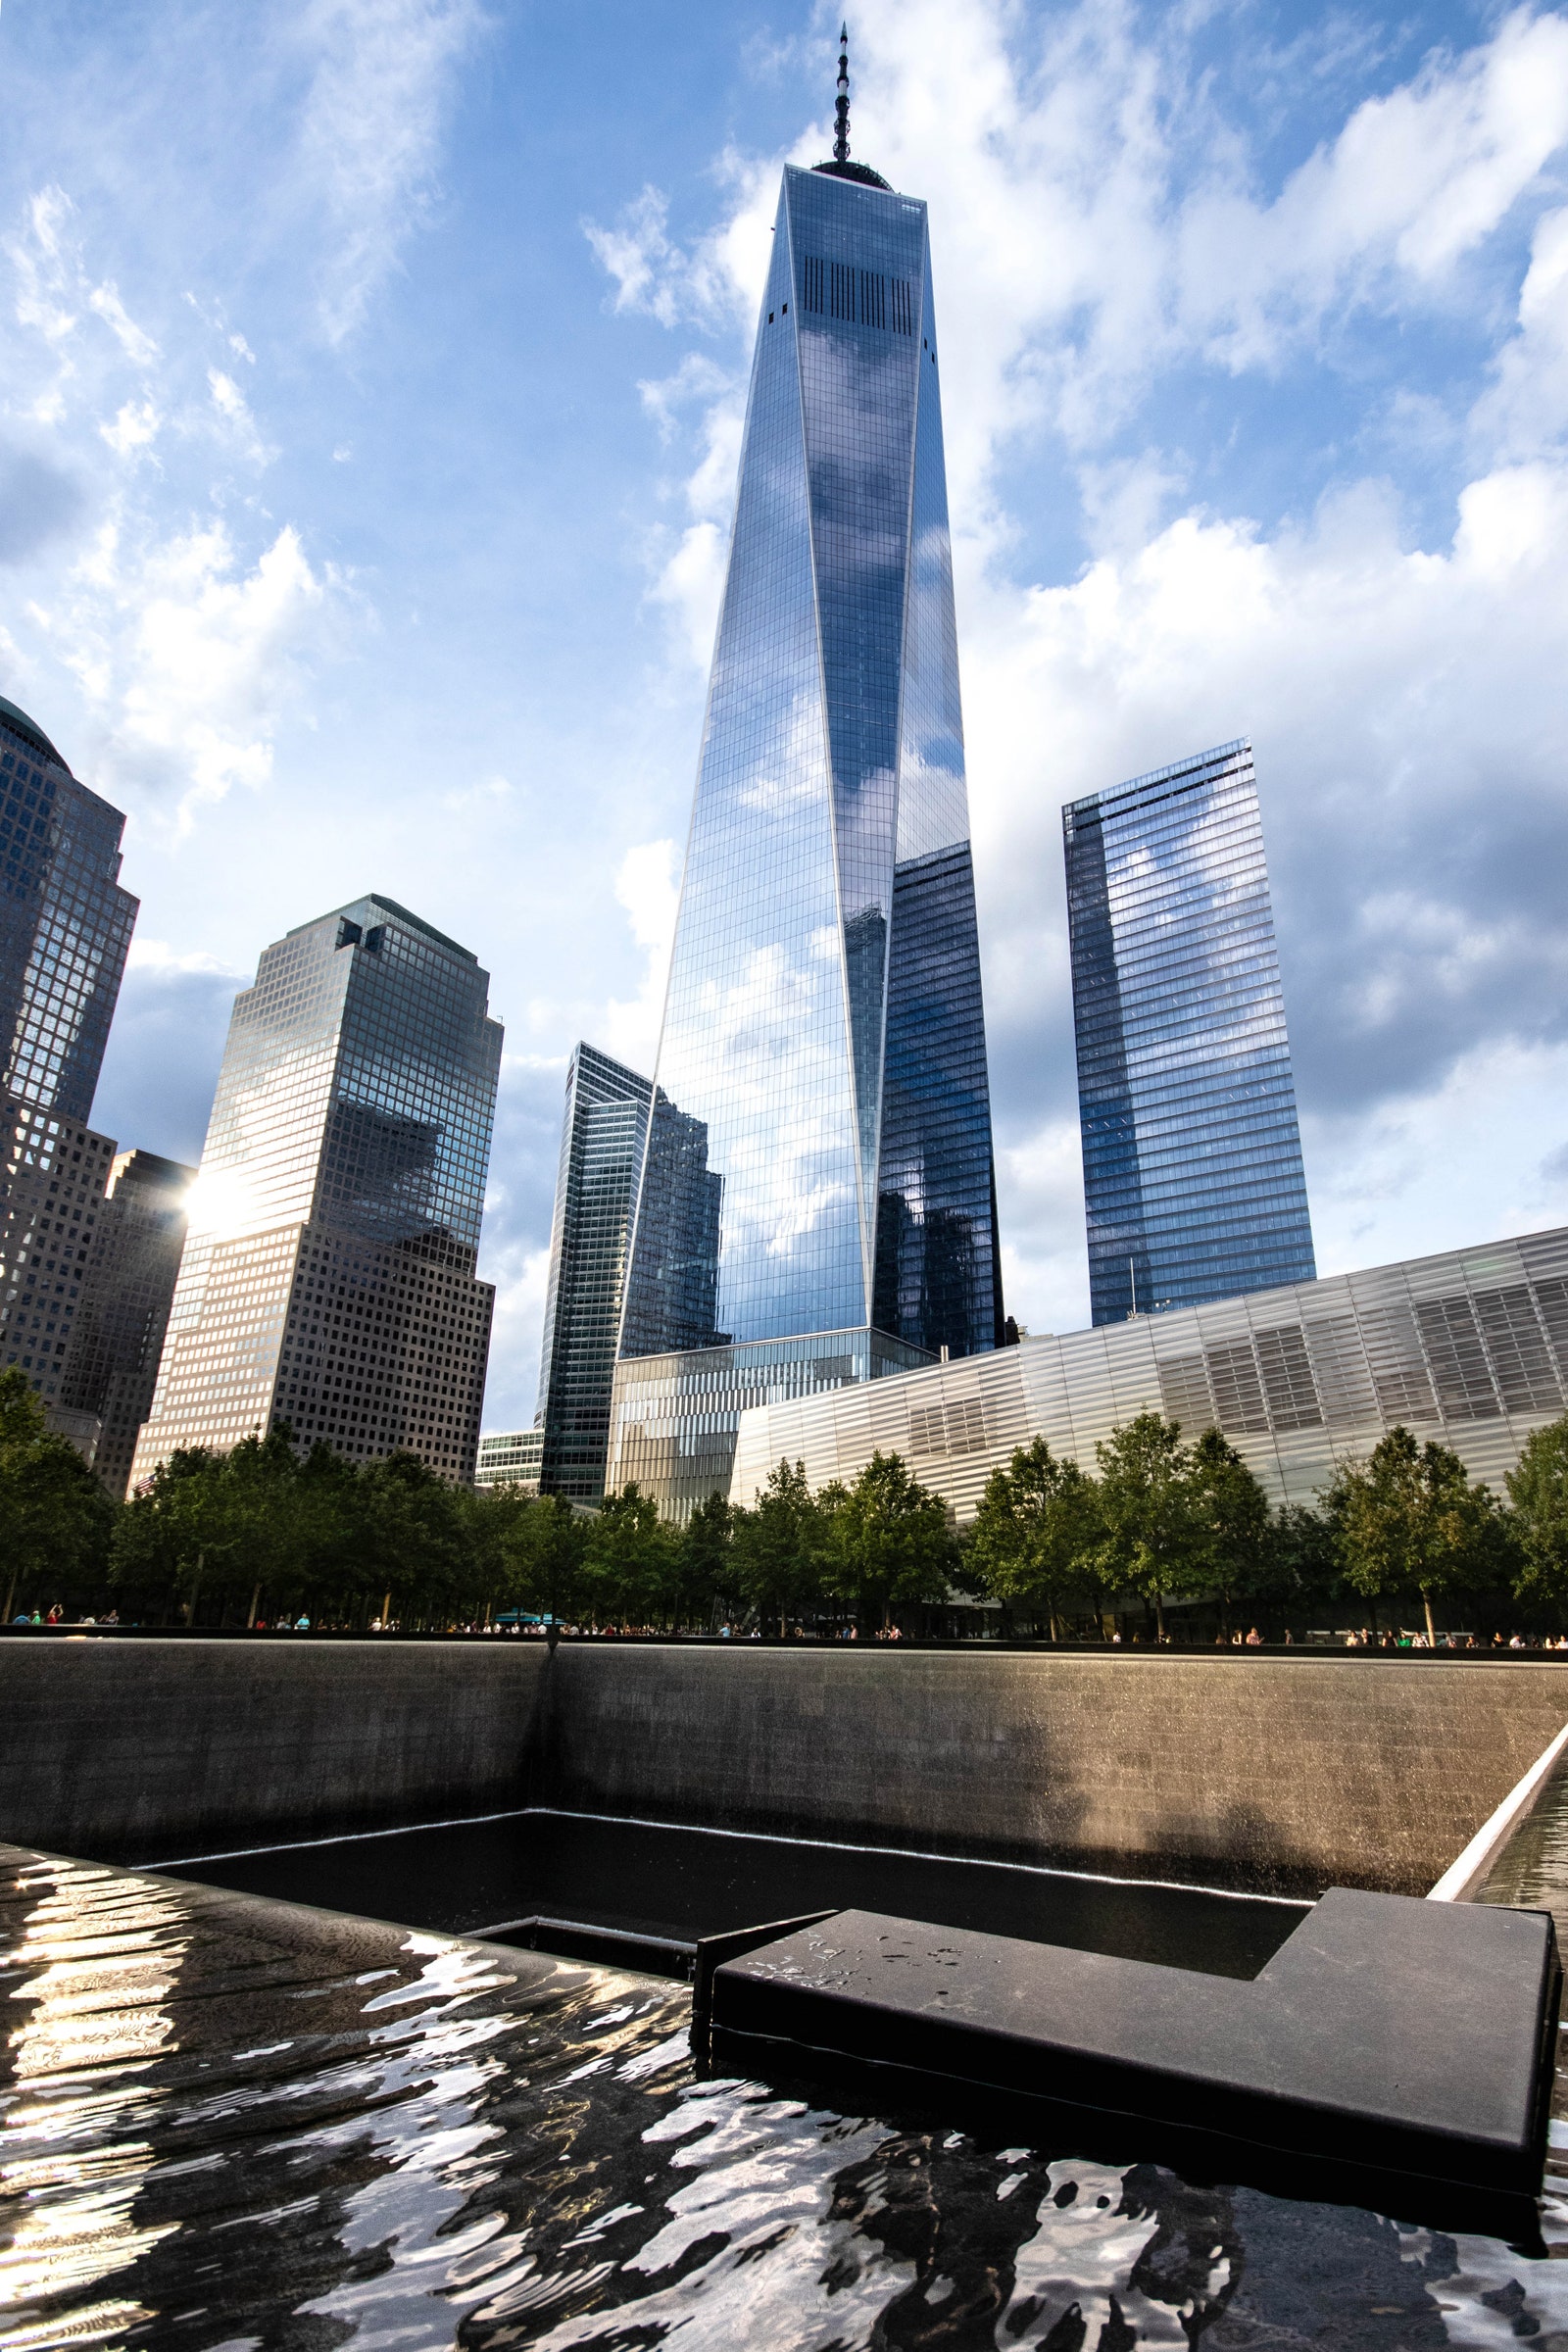 A view of the 911 memorial.